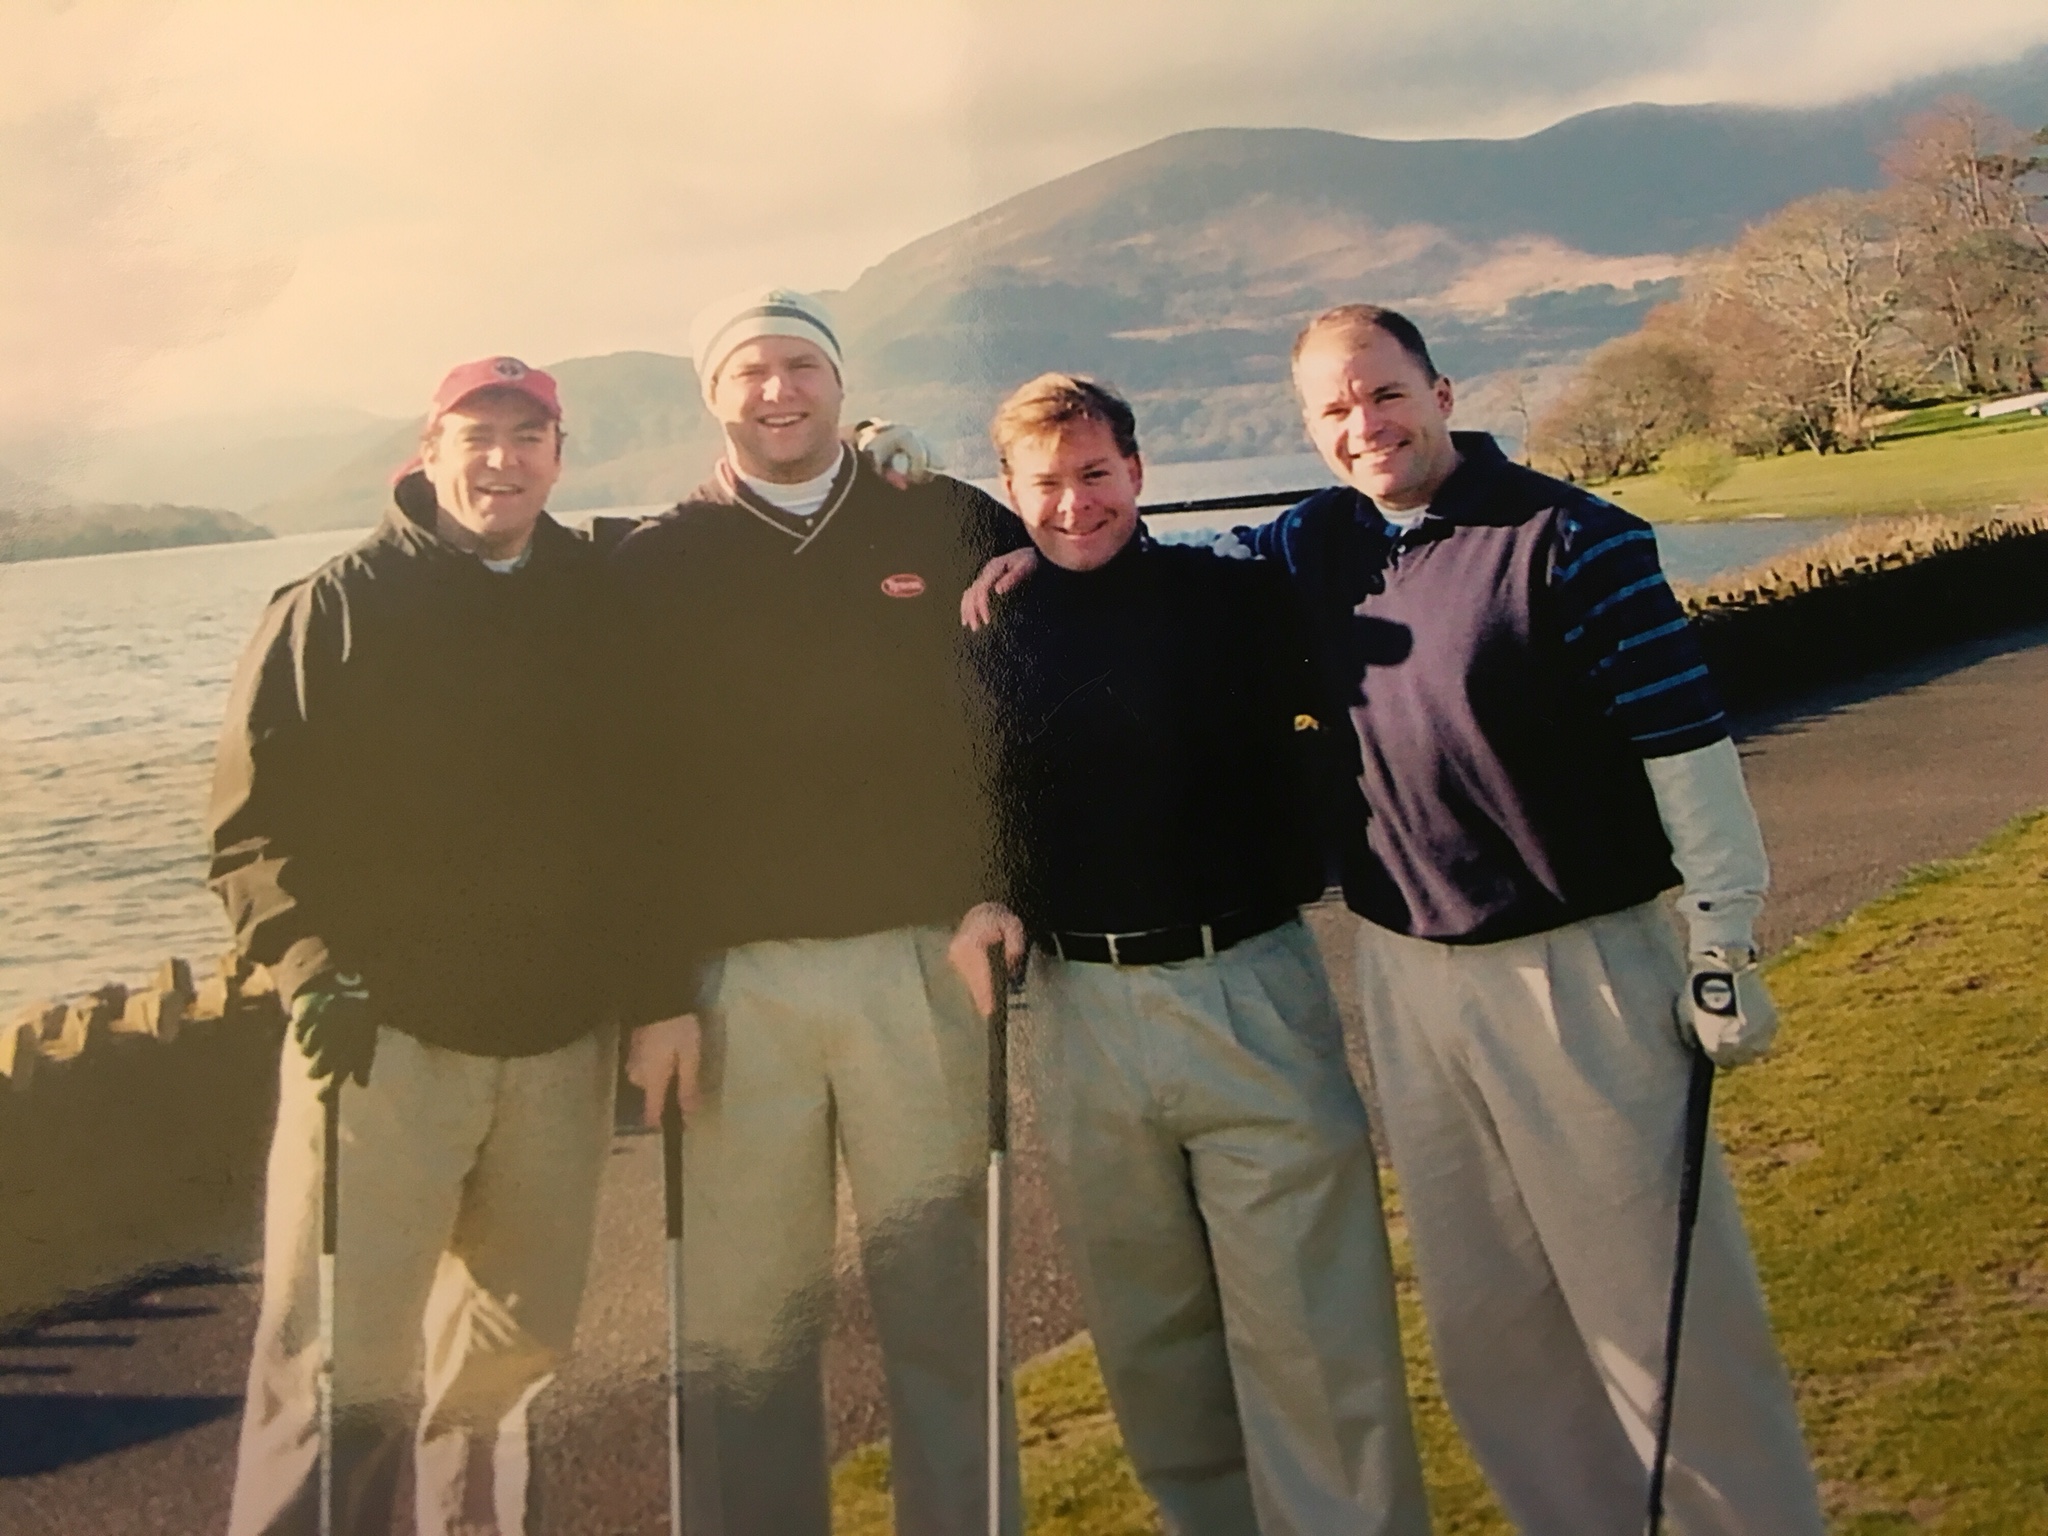 Keegan, second from right, golfing with friends in Ireland. (Courtesy Dan Keegan)